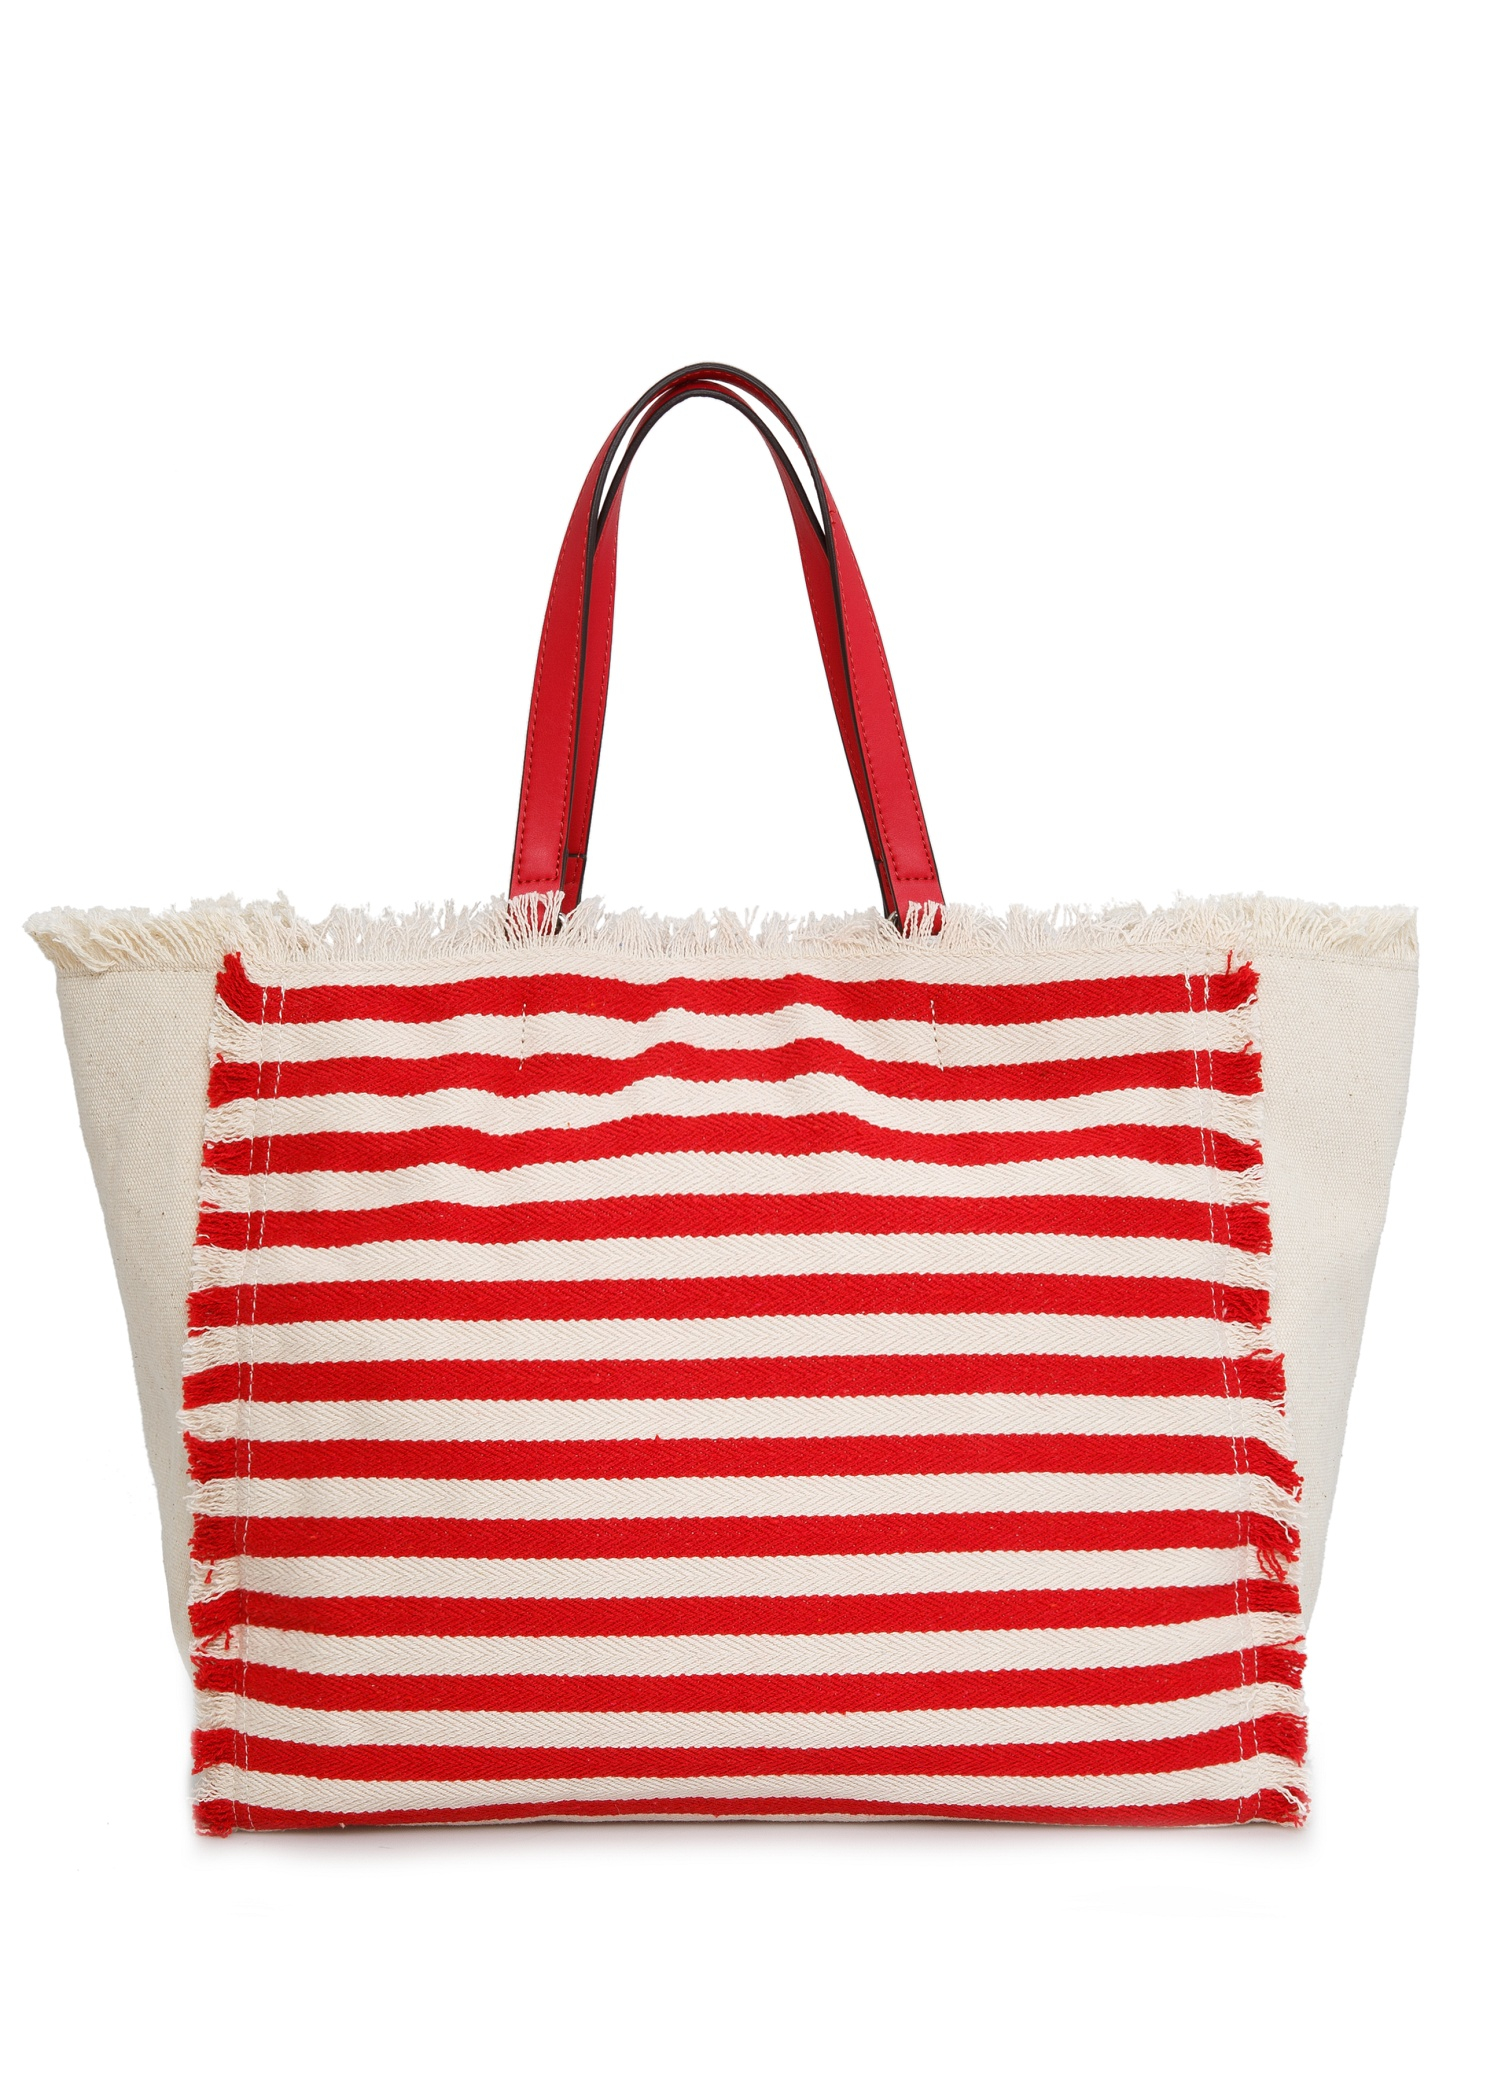 Lyst - Mango Striped Canvas Bag in Red